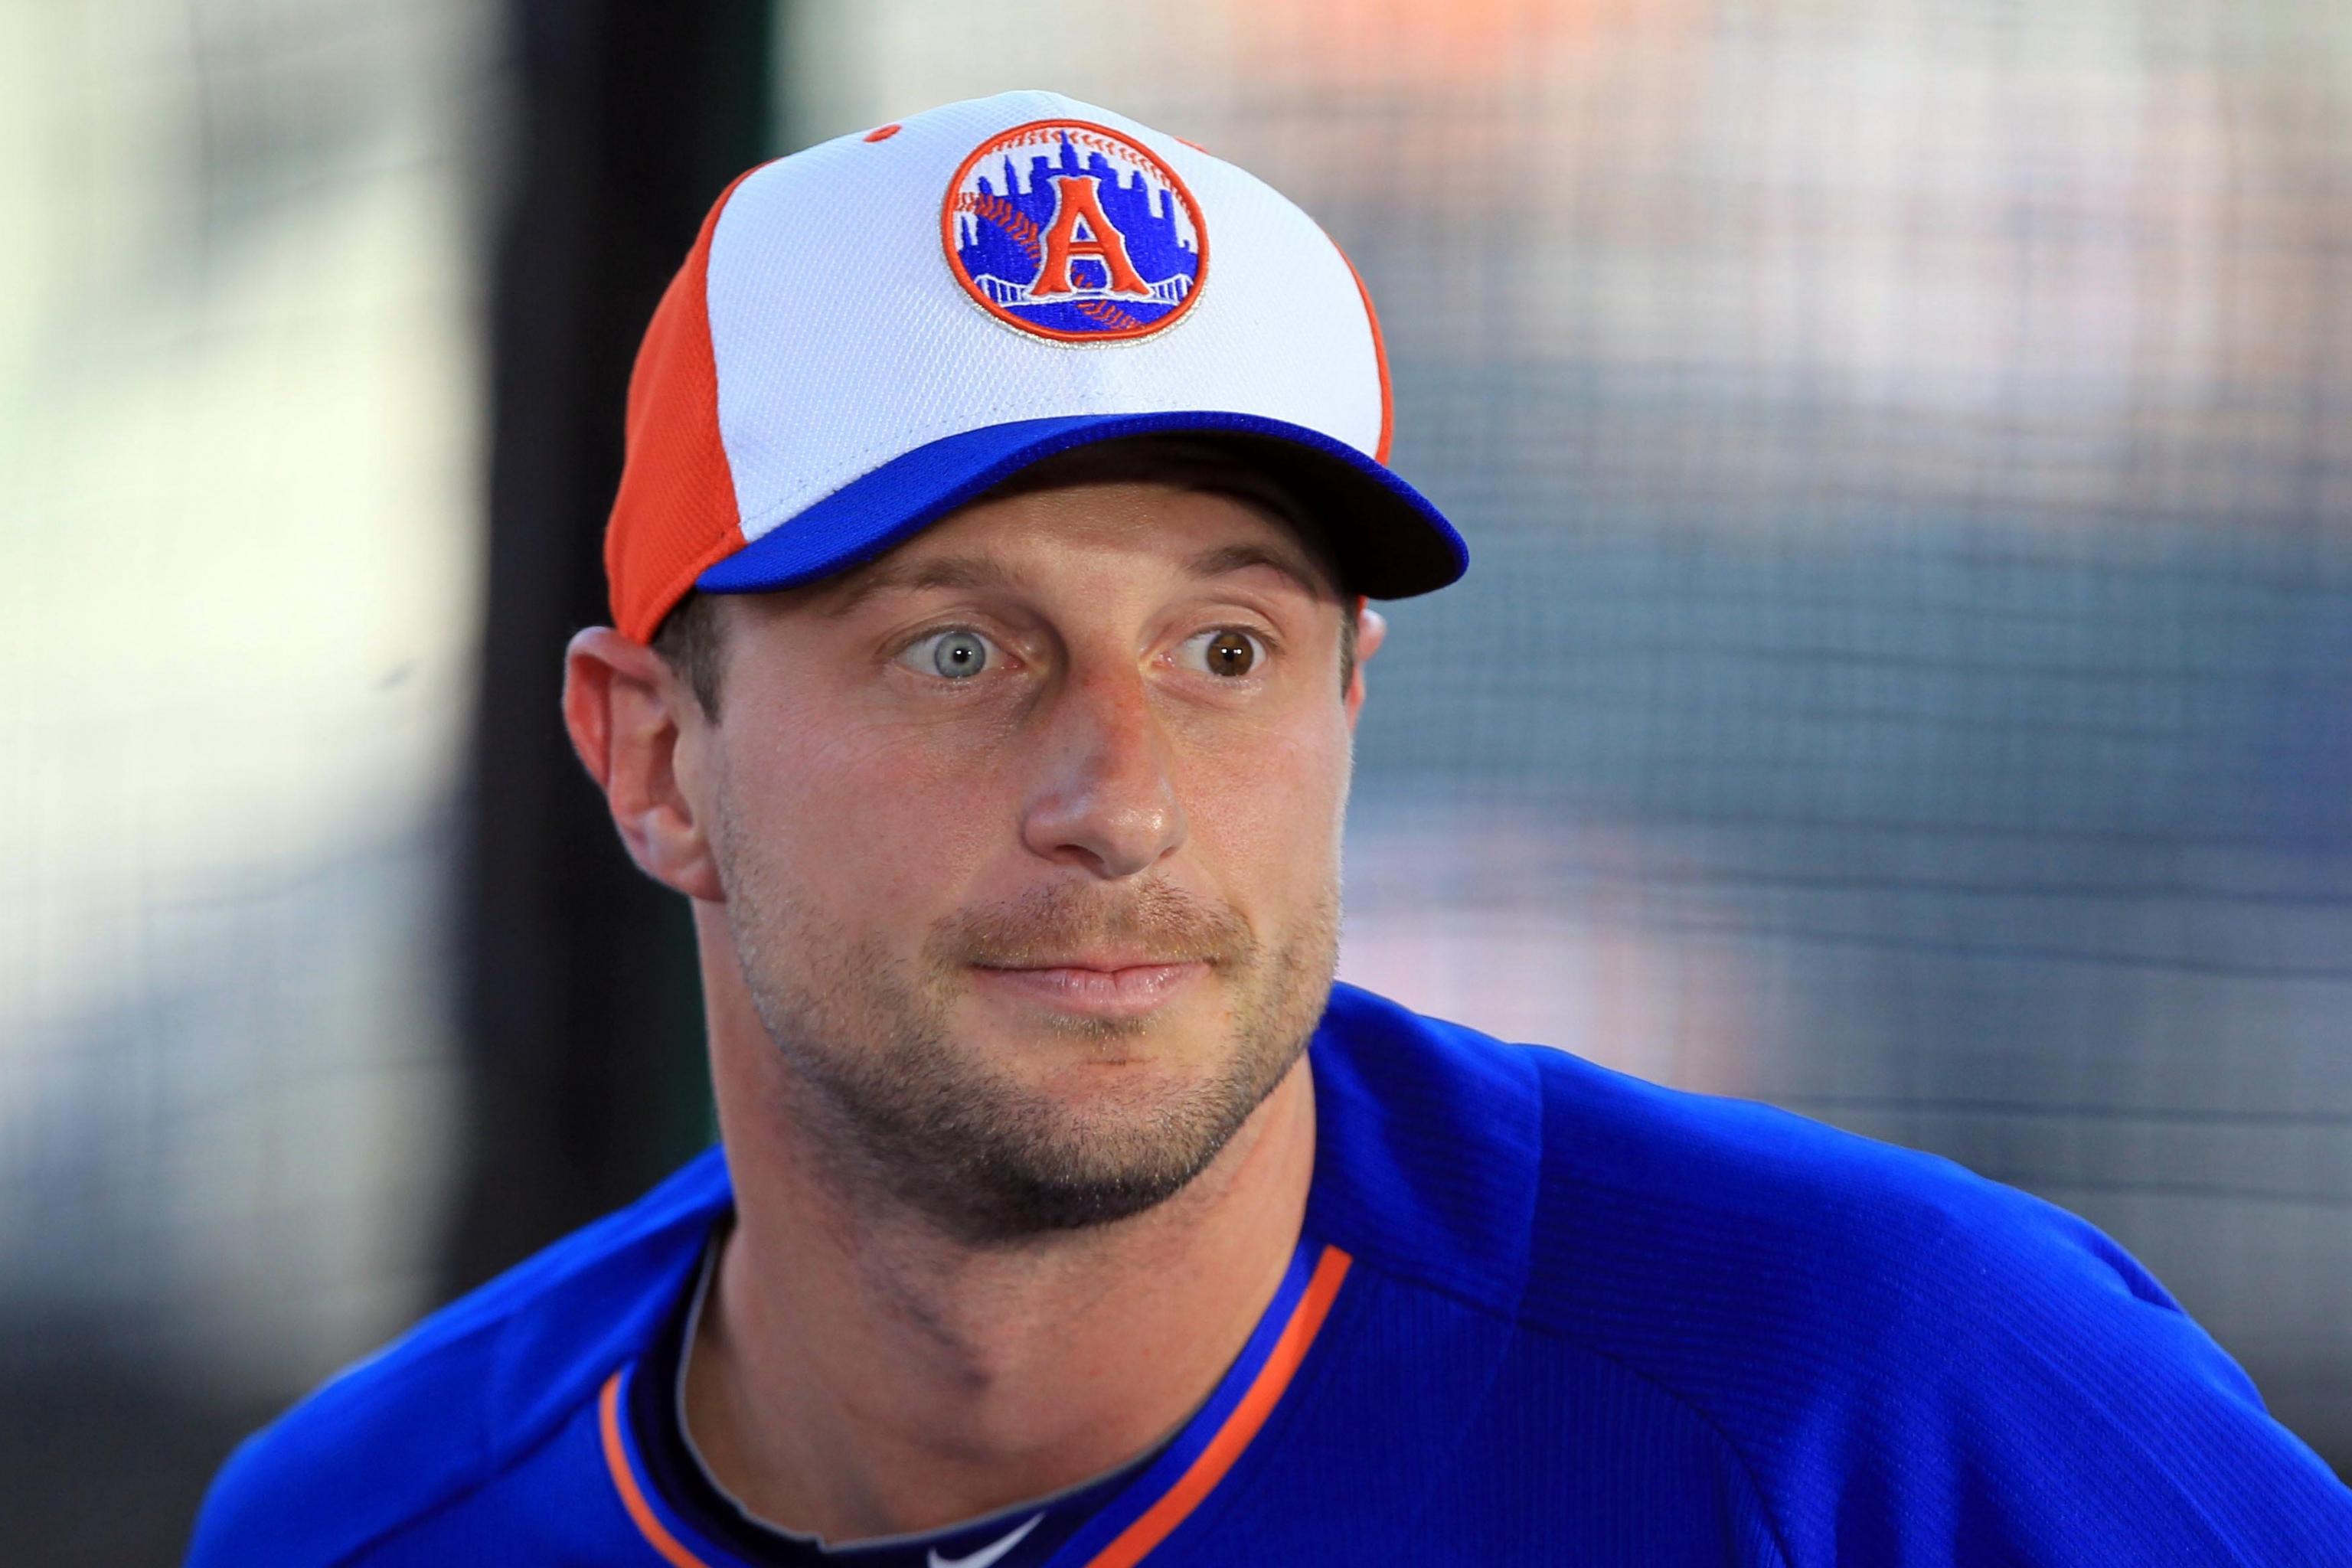 Why are Max Scherzer's eyes two different colors?